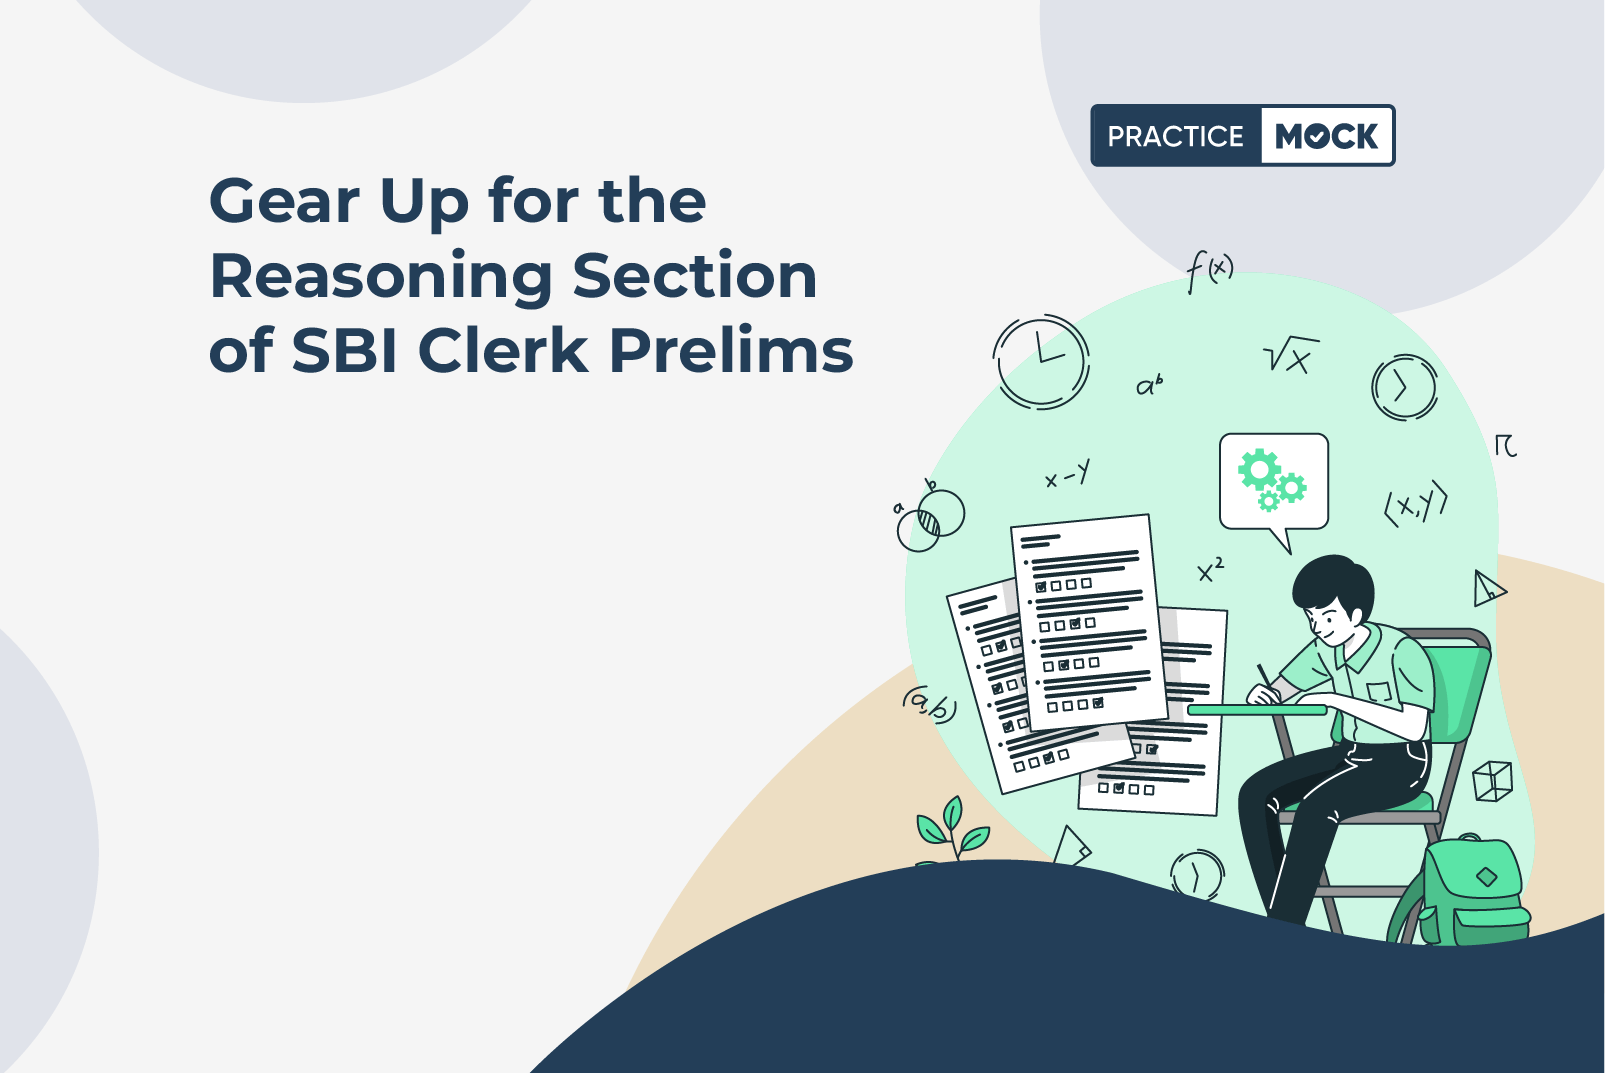 Gear Up for the Reasoning Section of SBI Clerk Prelims (1)